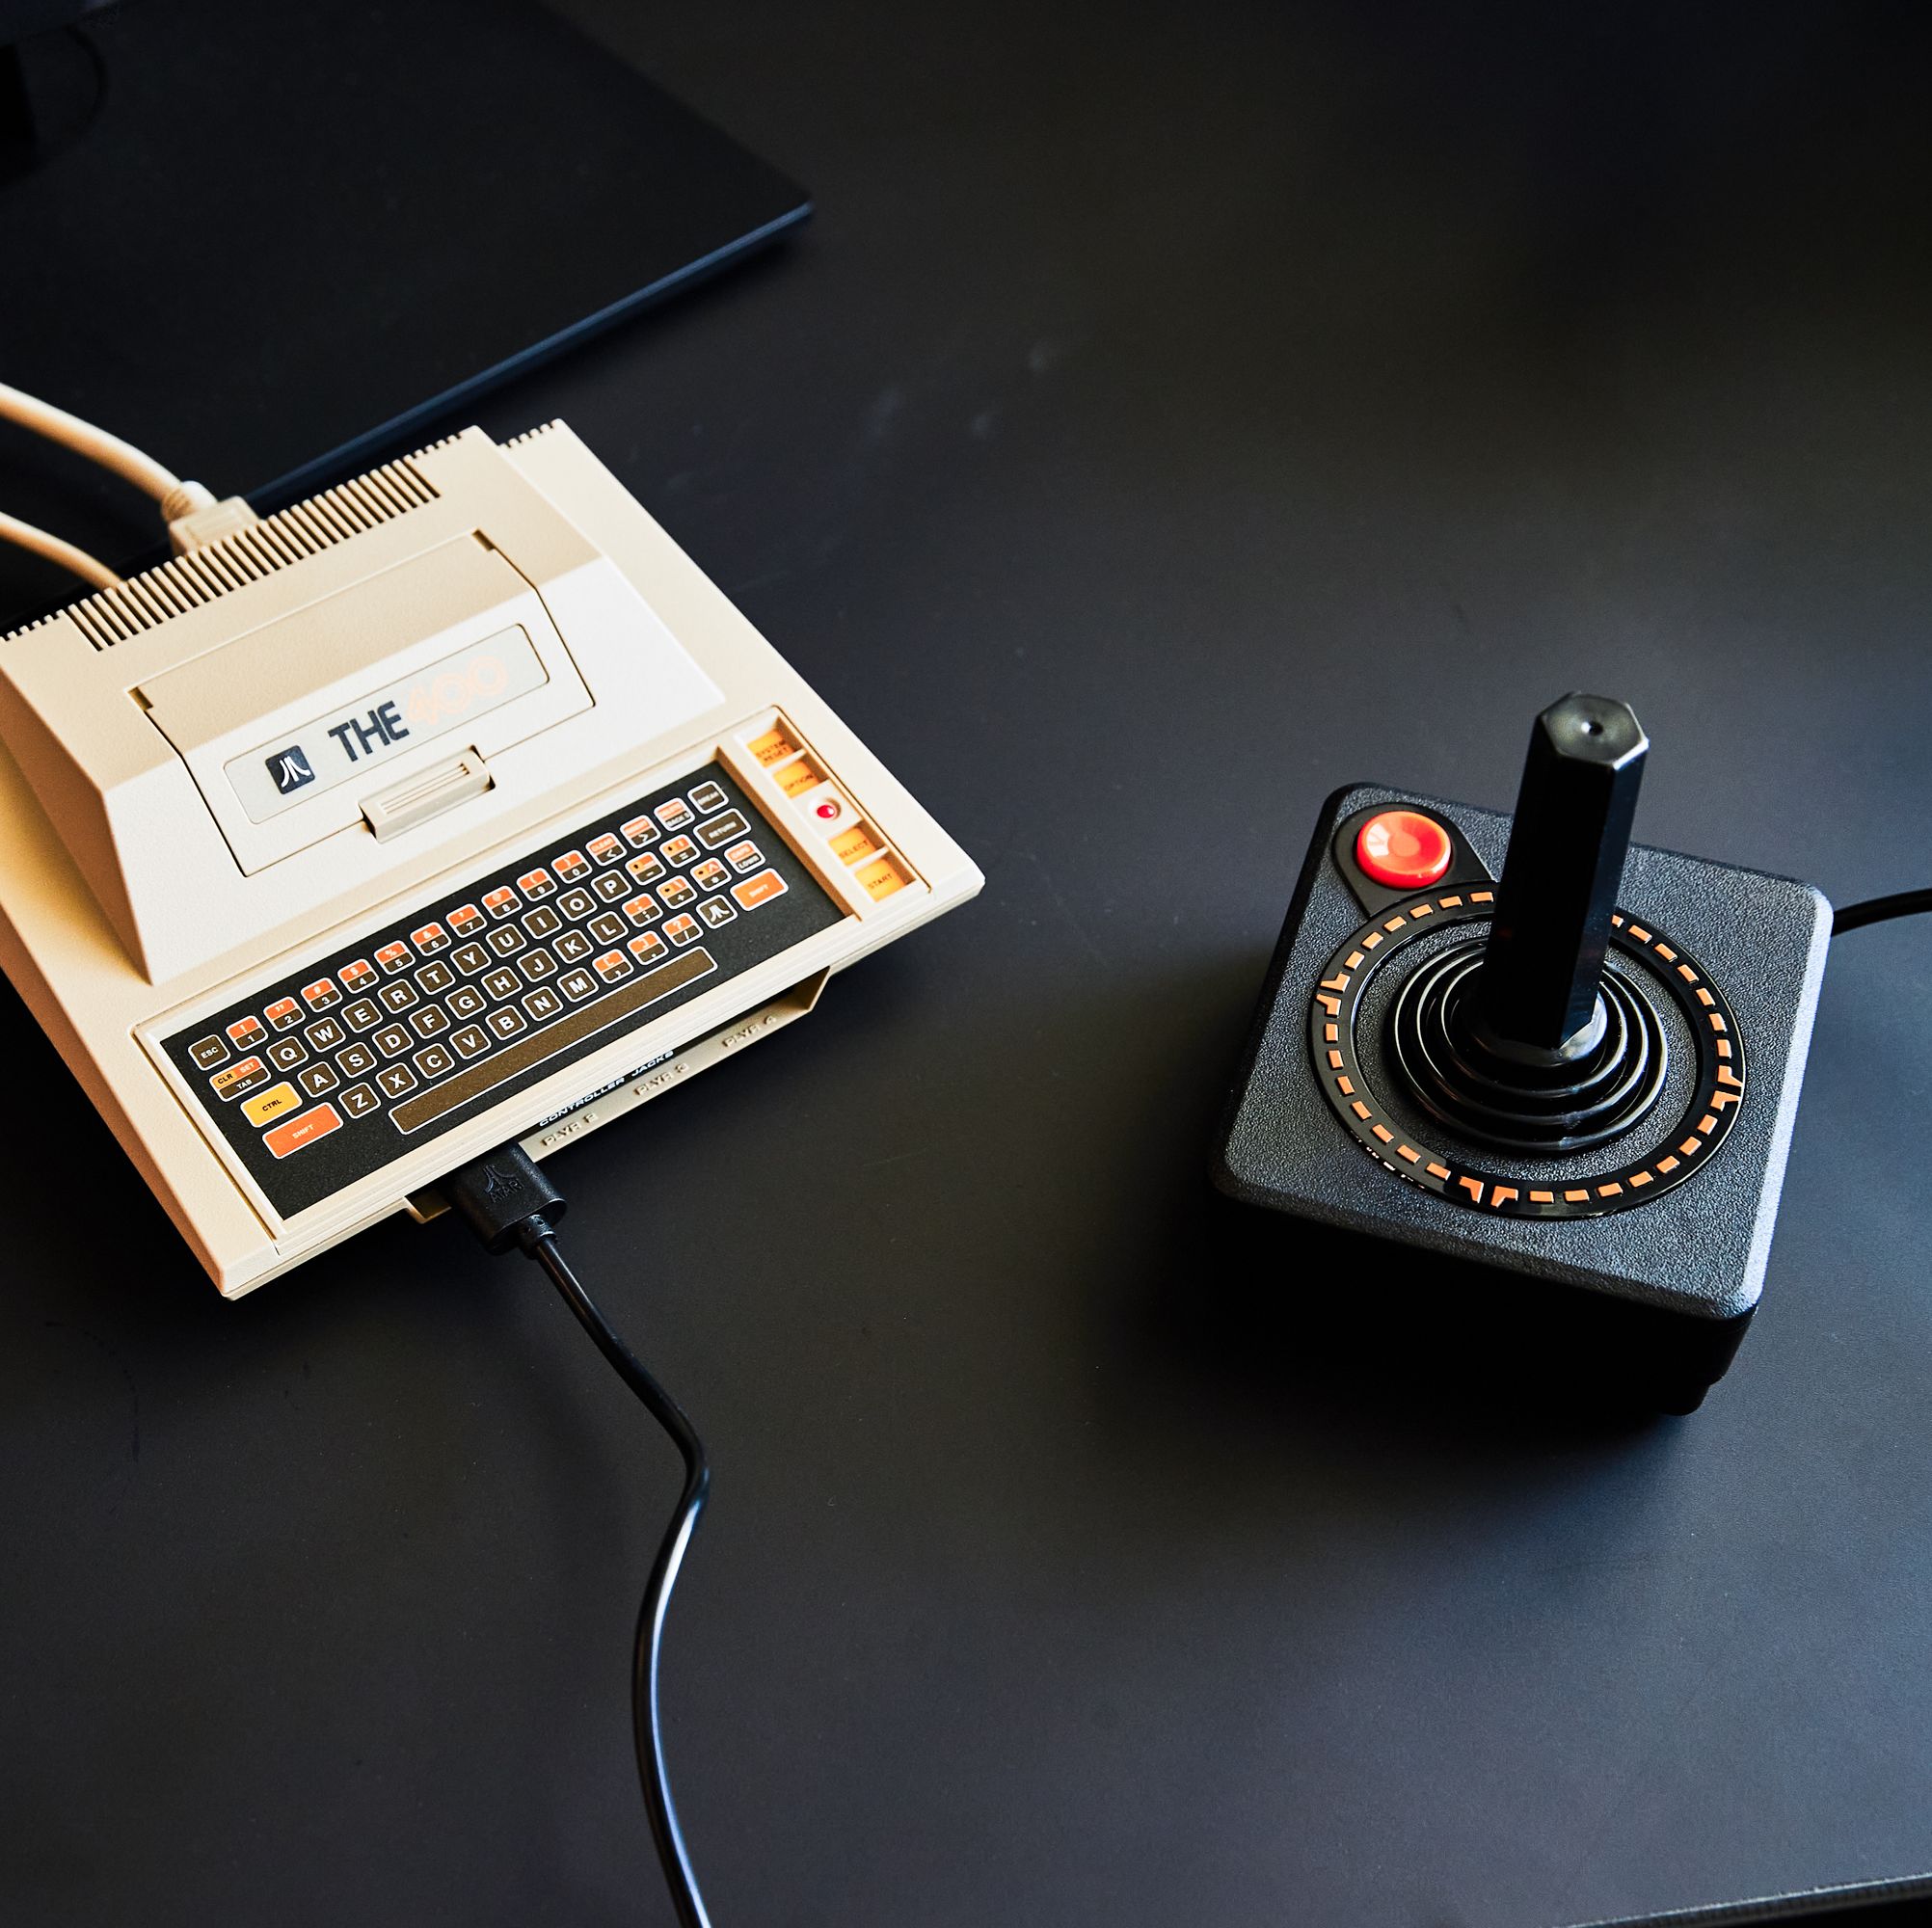 The Atari 400 Mini Is a Palm-Sized Homage to the 8-Bit Personal Computer Era